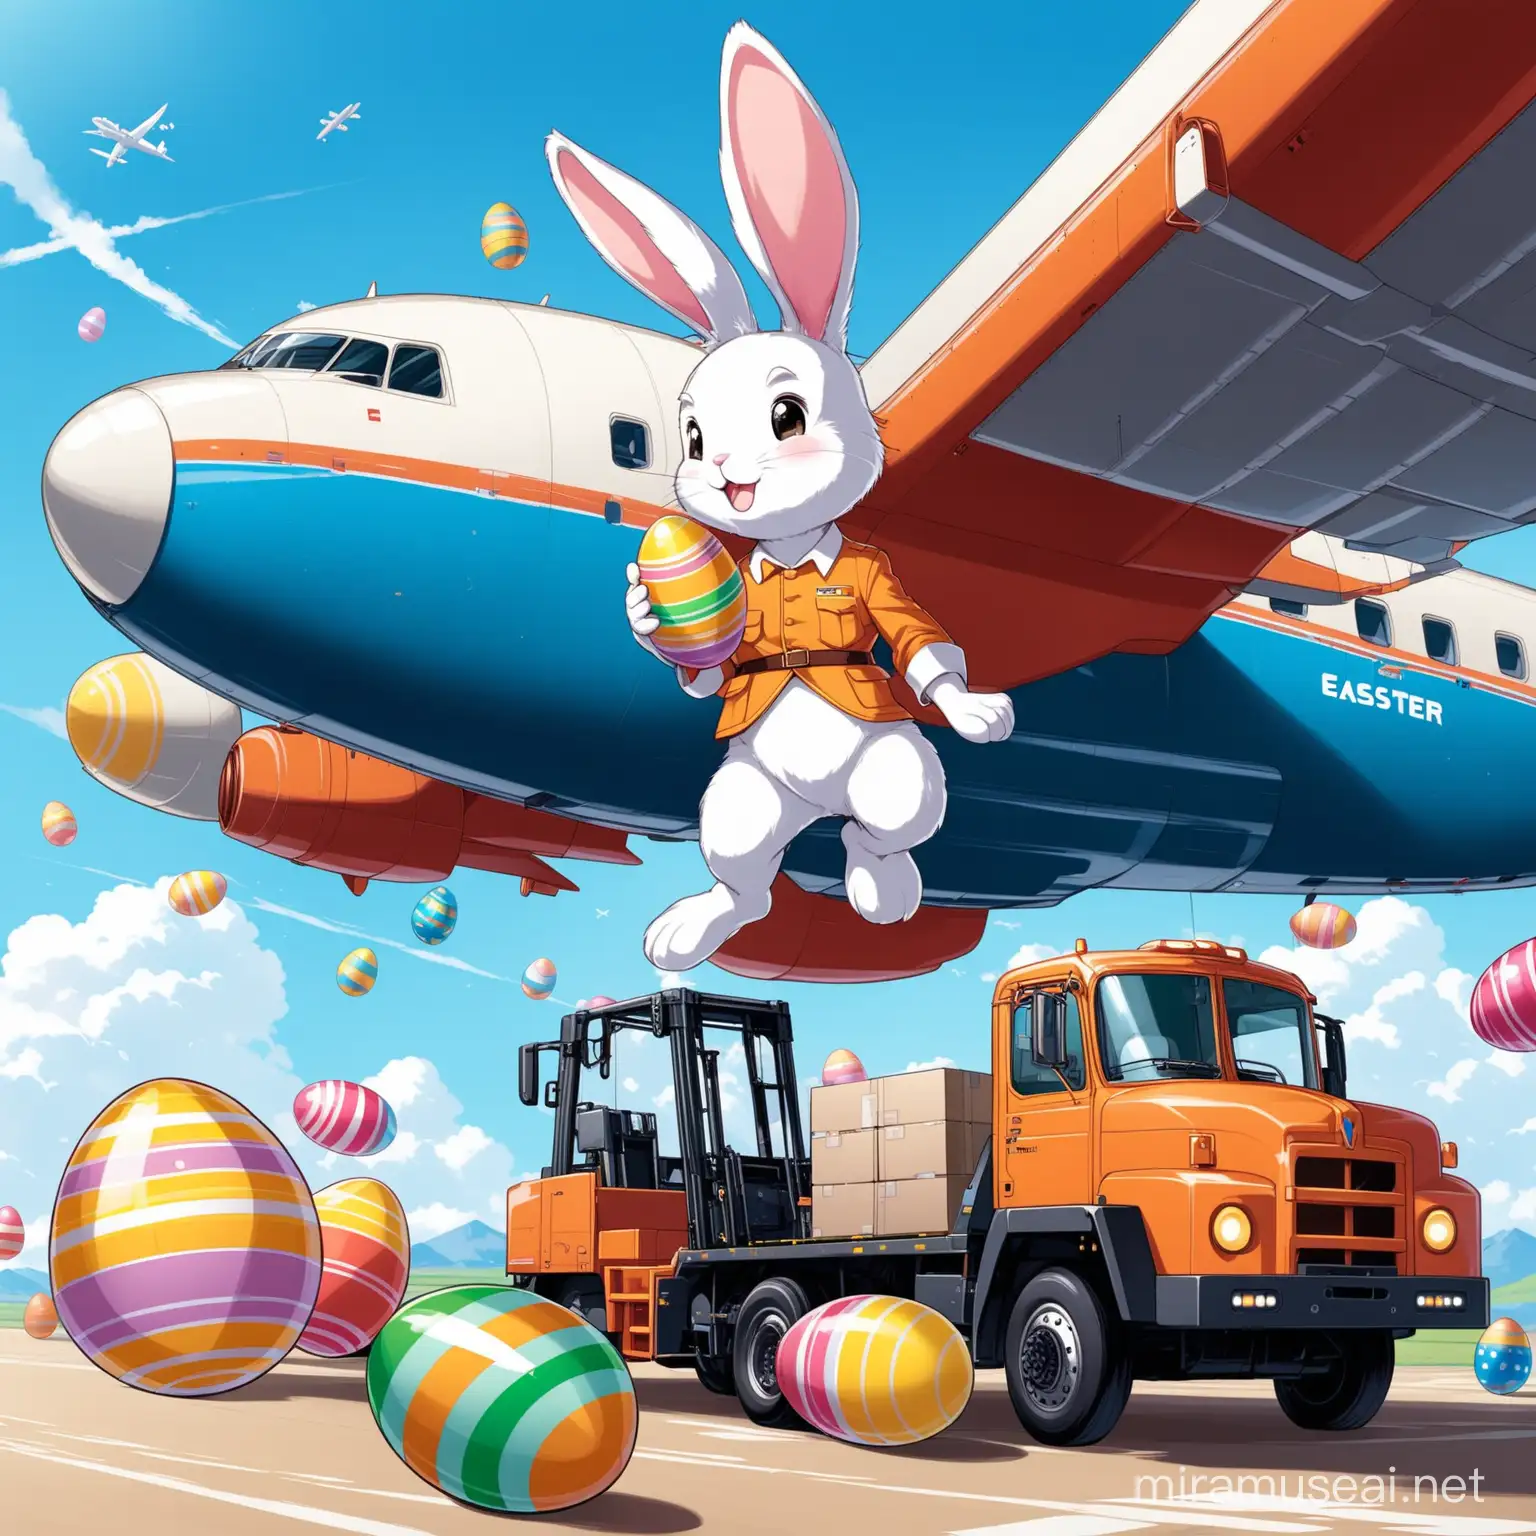 Easter Bunny in Uniform Loading Easter Eggs into Aircrafts and Trucks